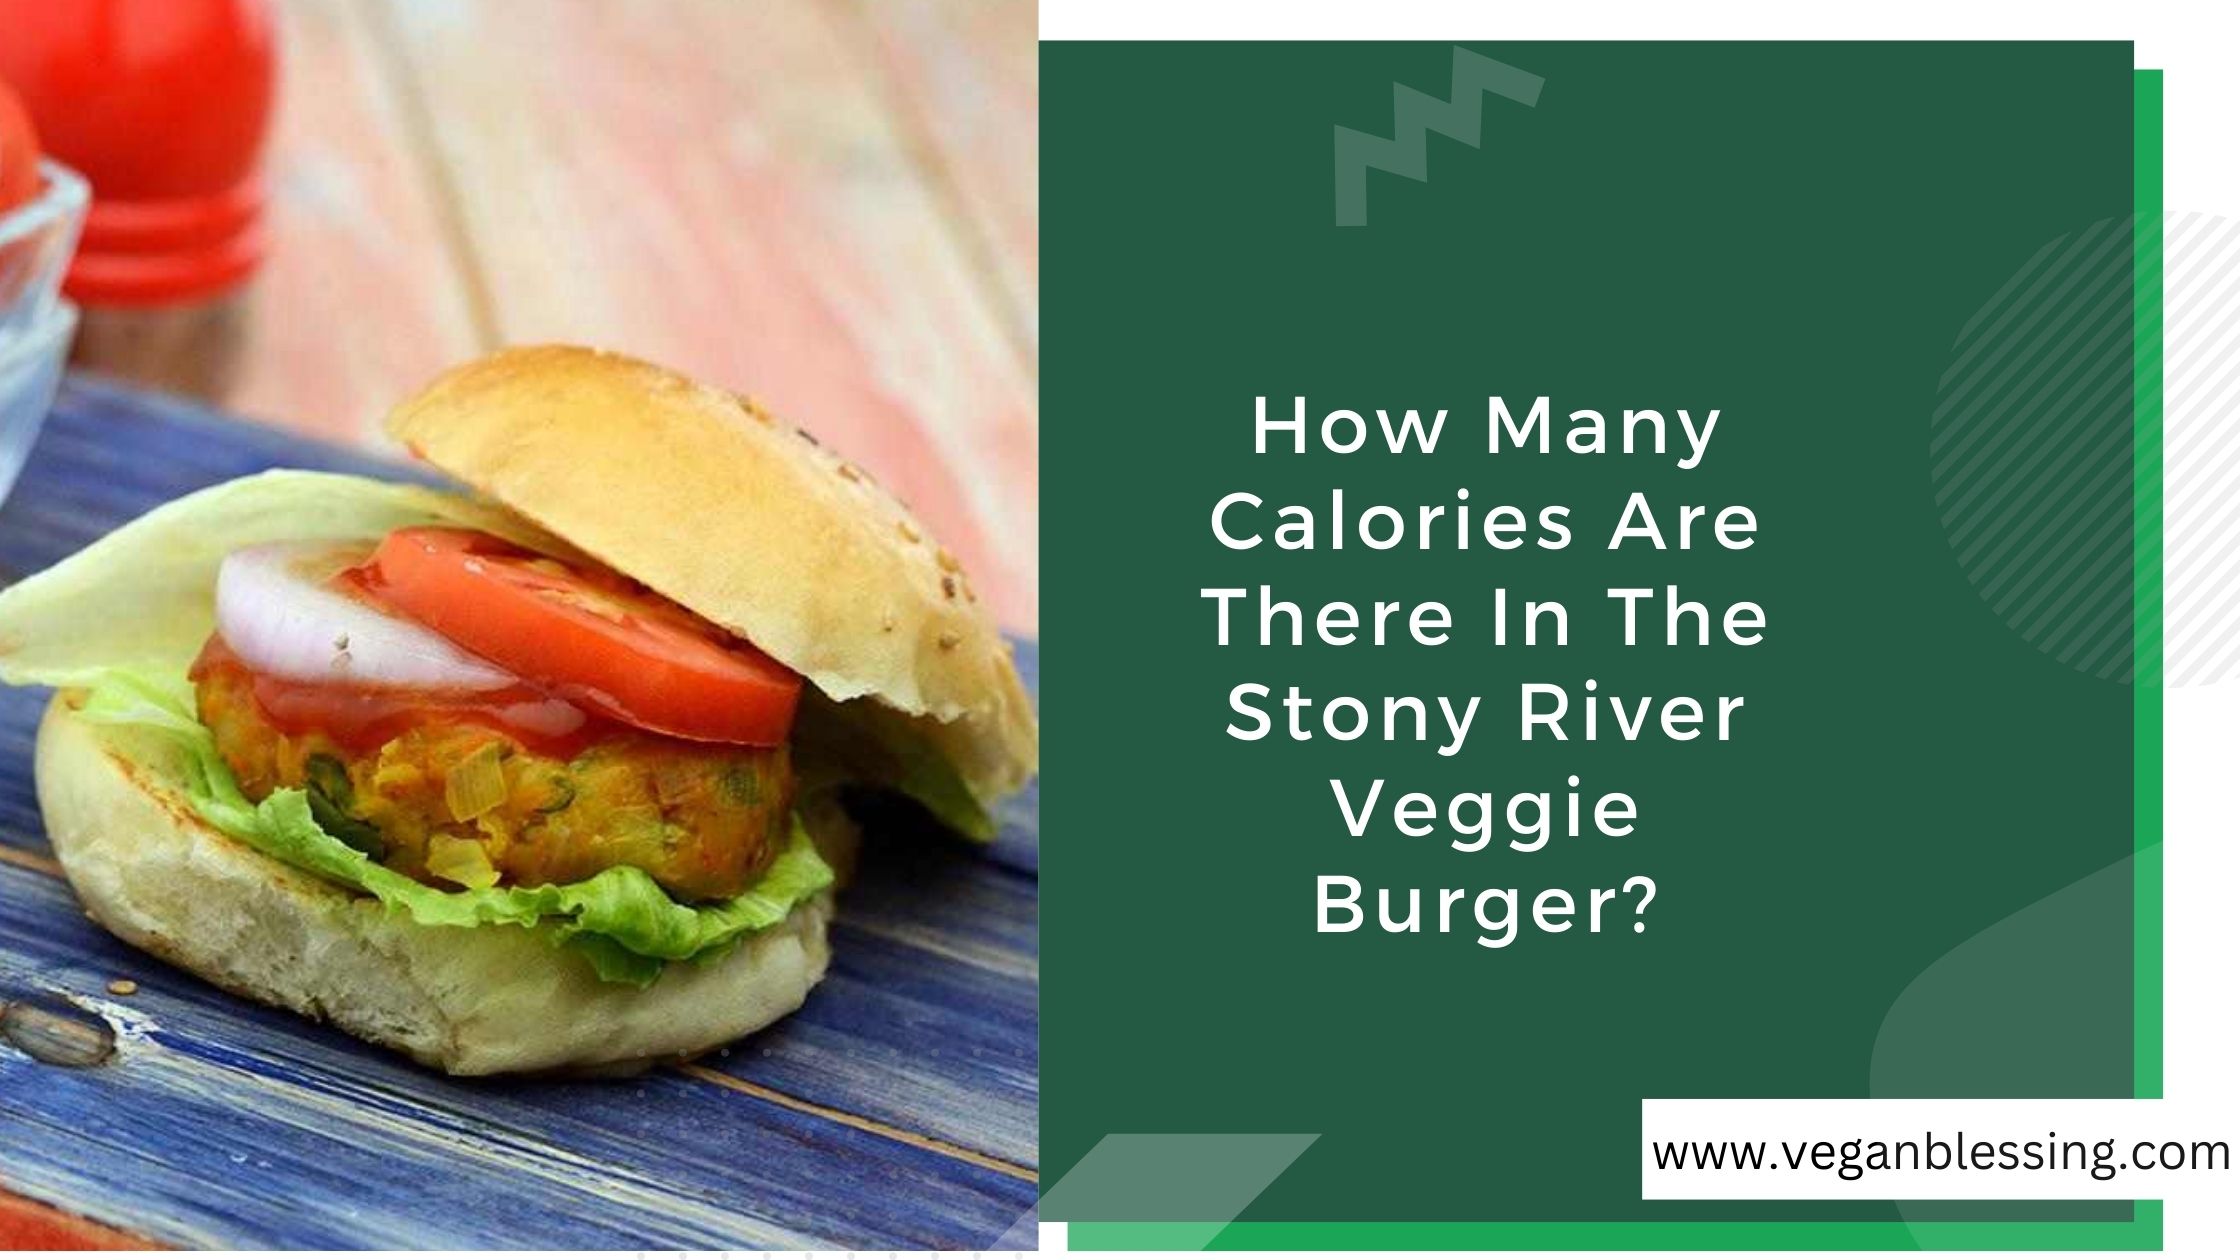 How Many Calories Are There In The Stony River Veggie Burger? How Many Calories Are There In The Stony River Veggie Burger